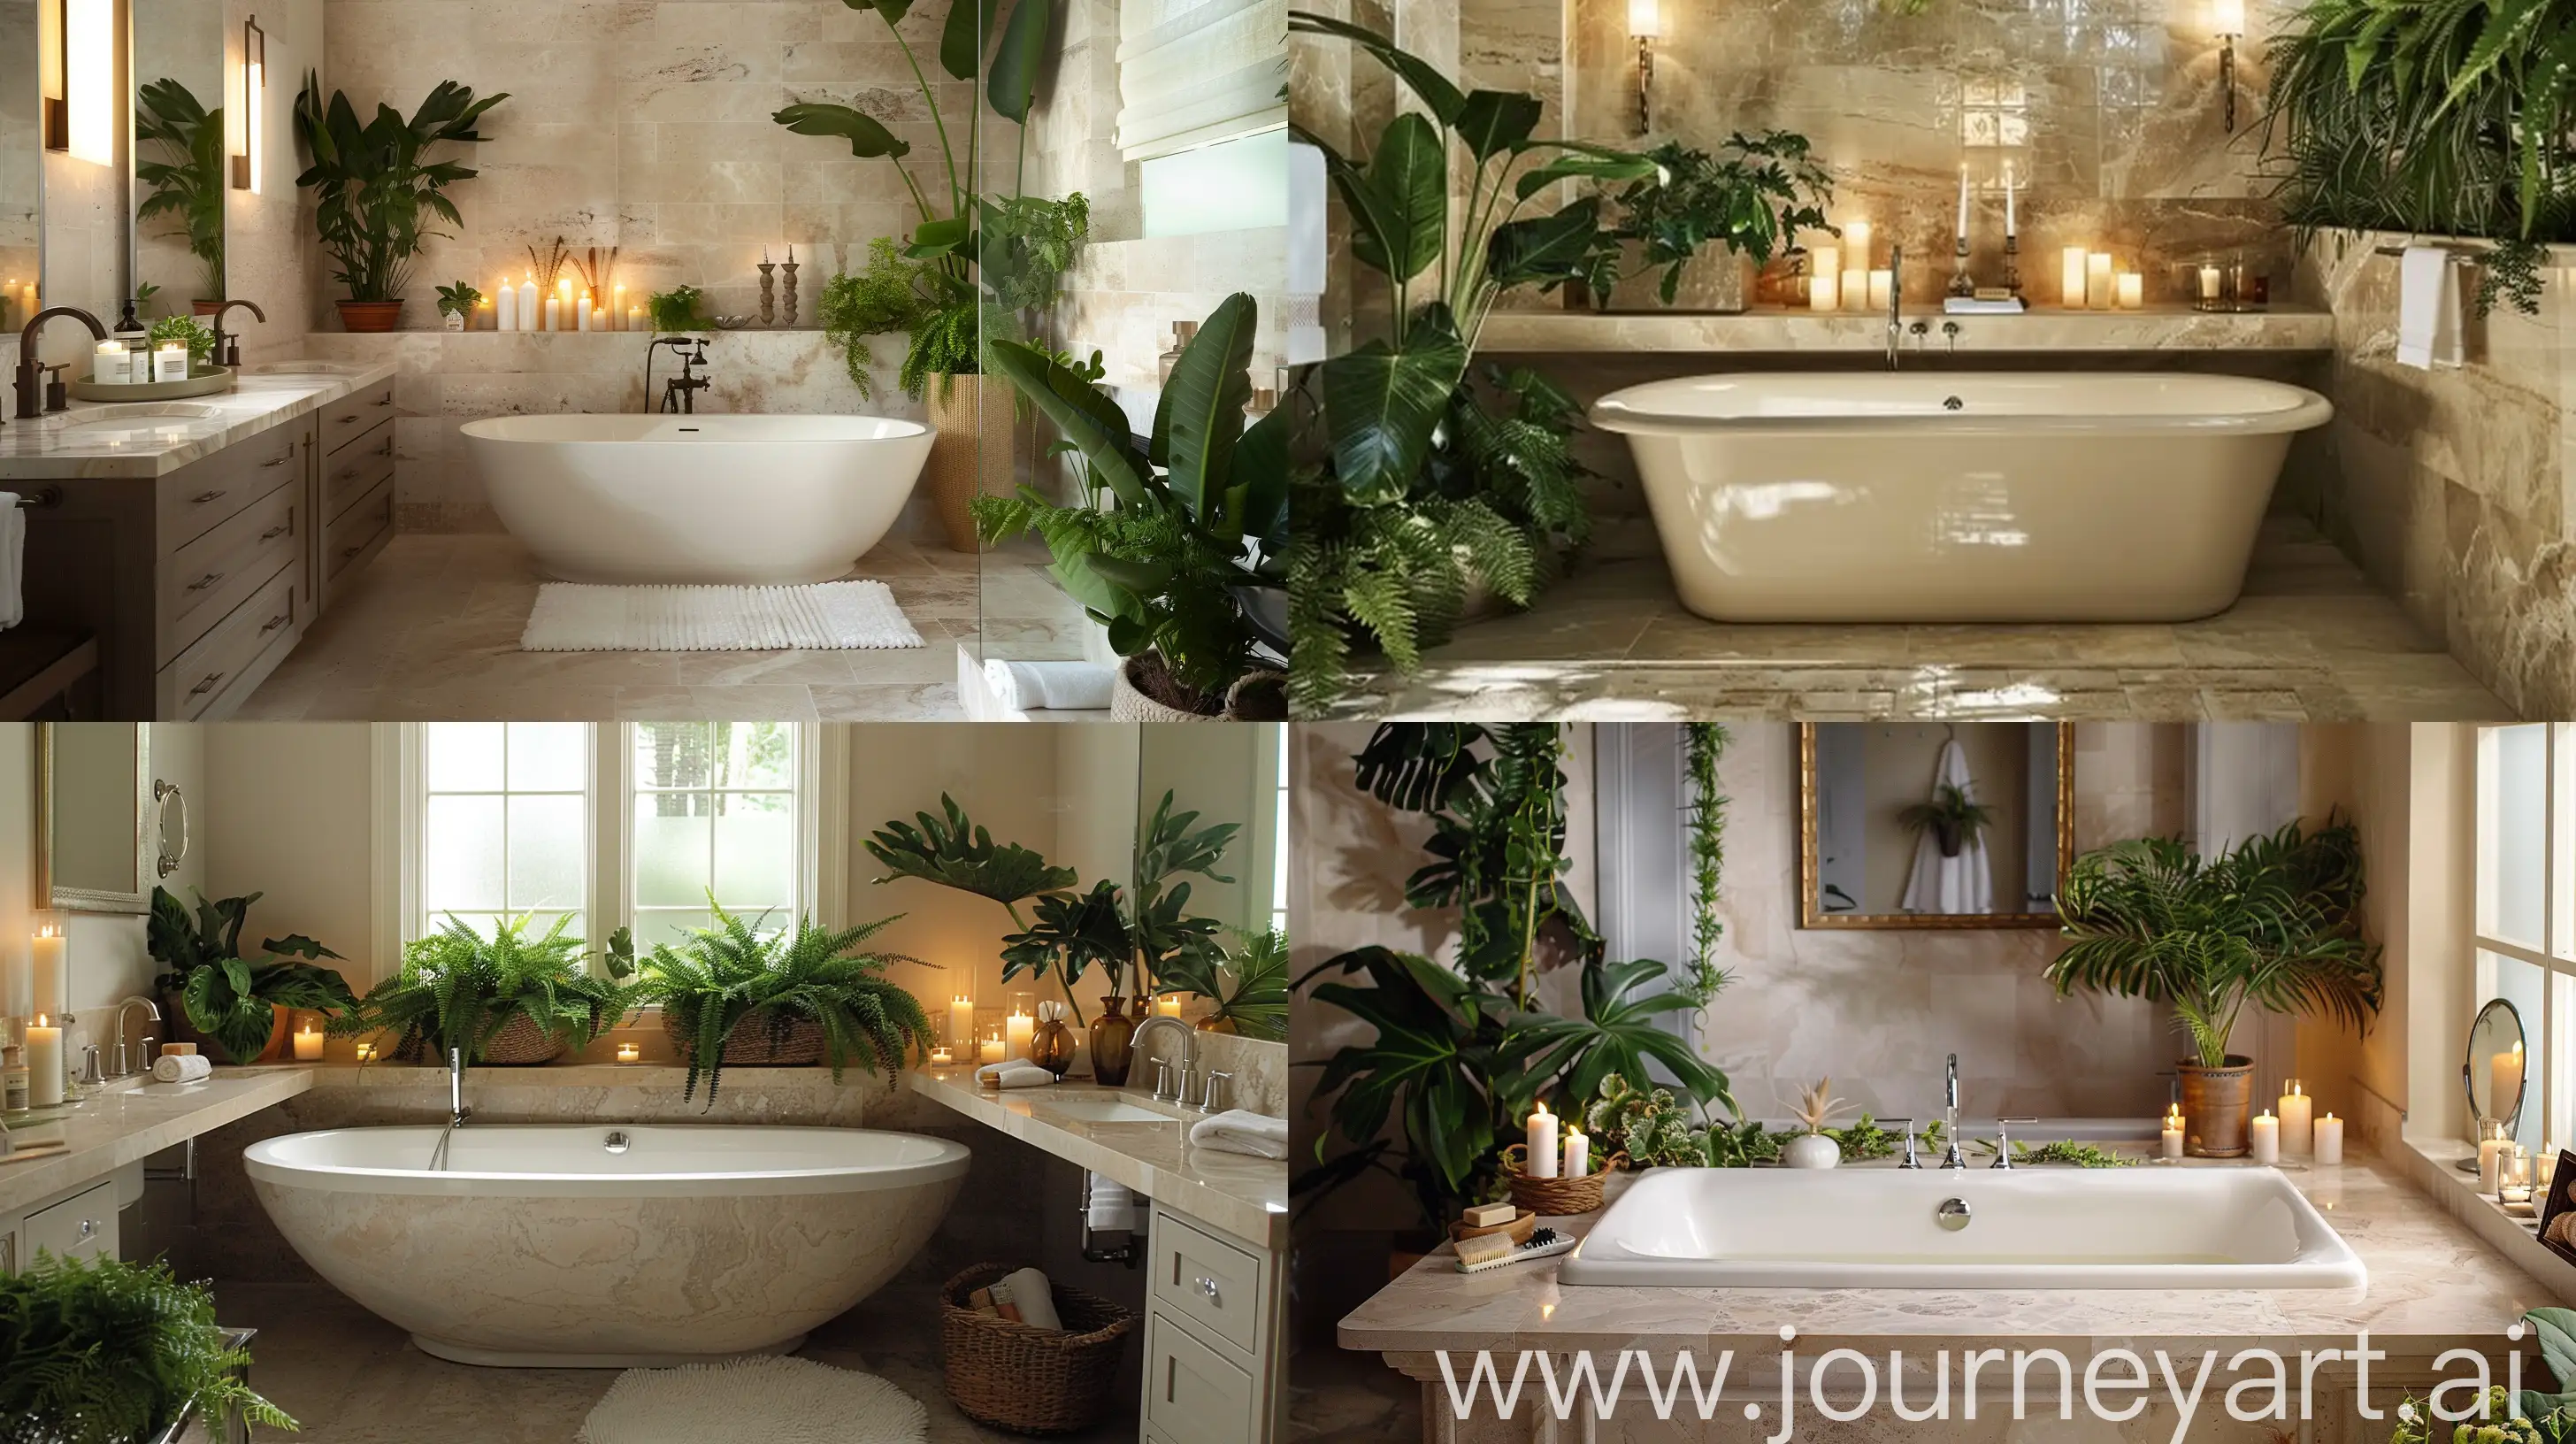 Indulge in the tranquility of a spa-inspired bathroom retreat, where soft, earthy tones of beige and taupe meet sleek marble countertops. A freestanding bathtub takes center stage, surrounded by candles and lush greenery. --ar 16:9